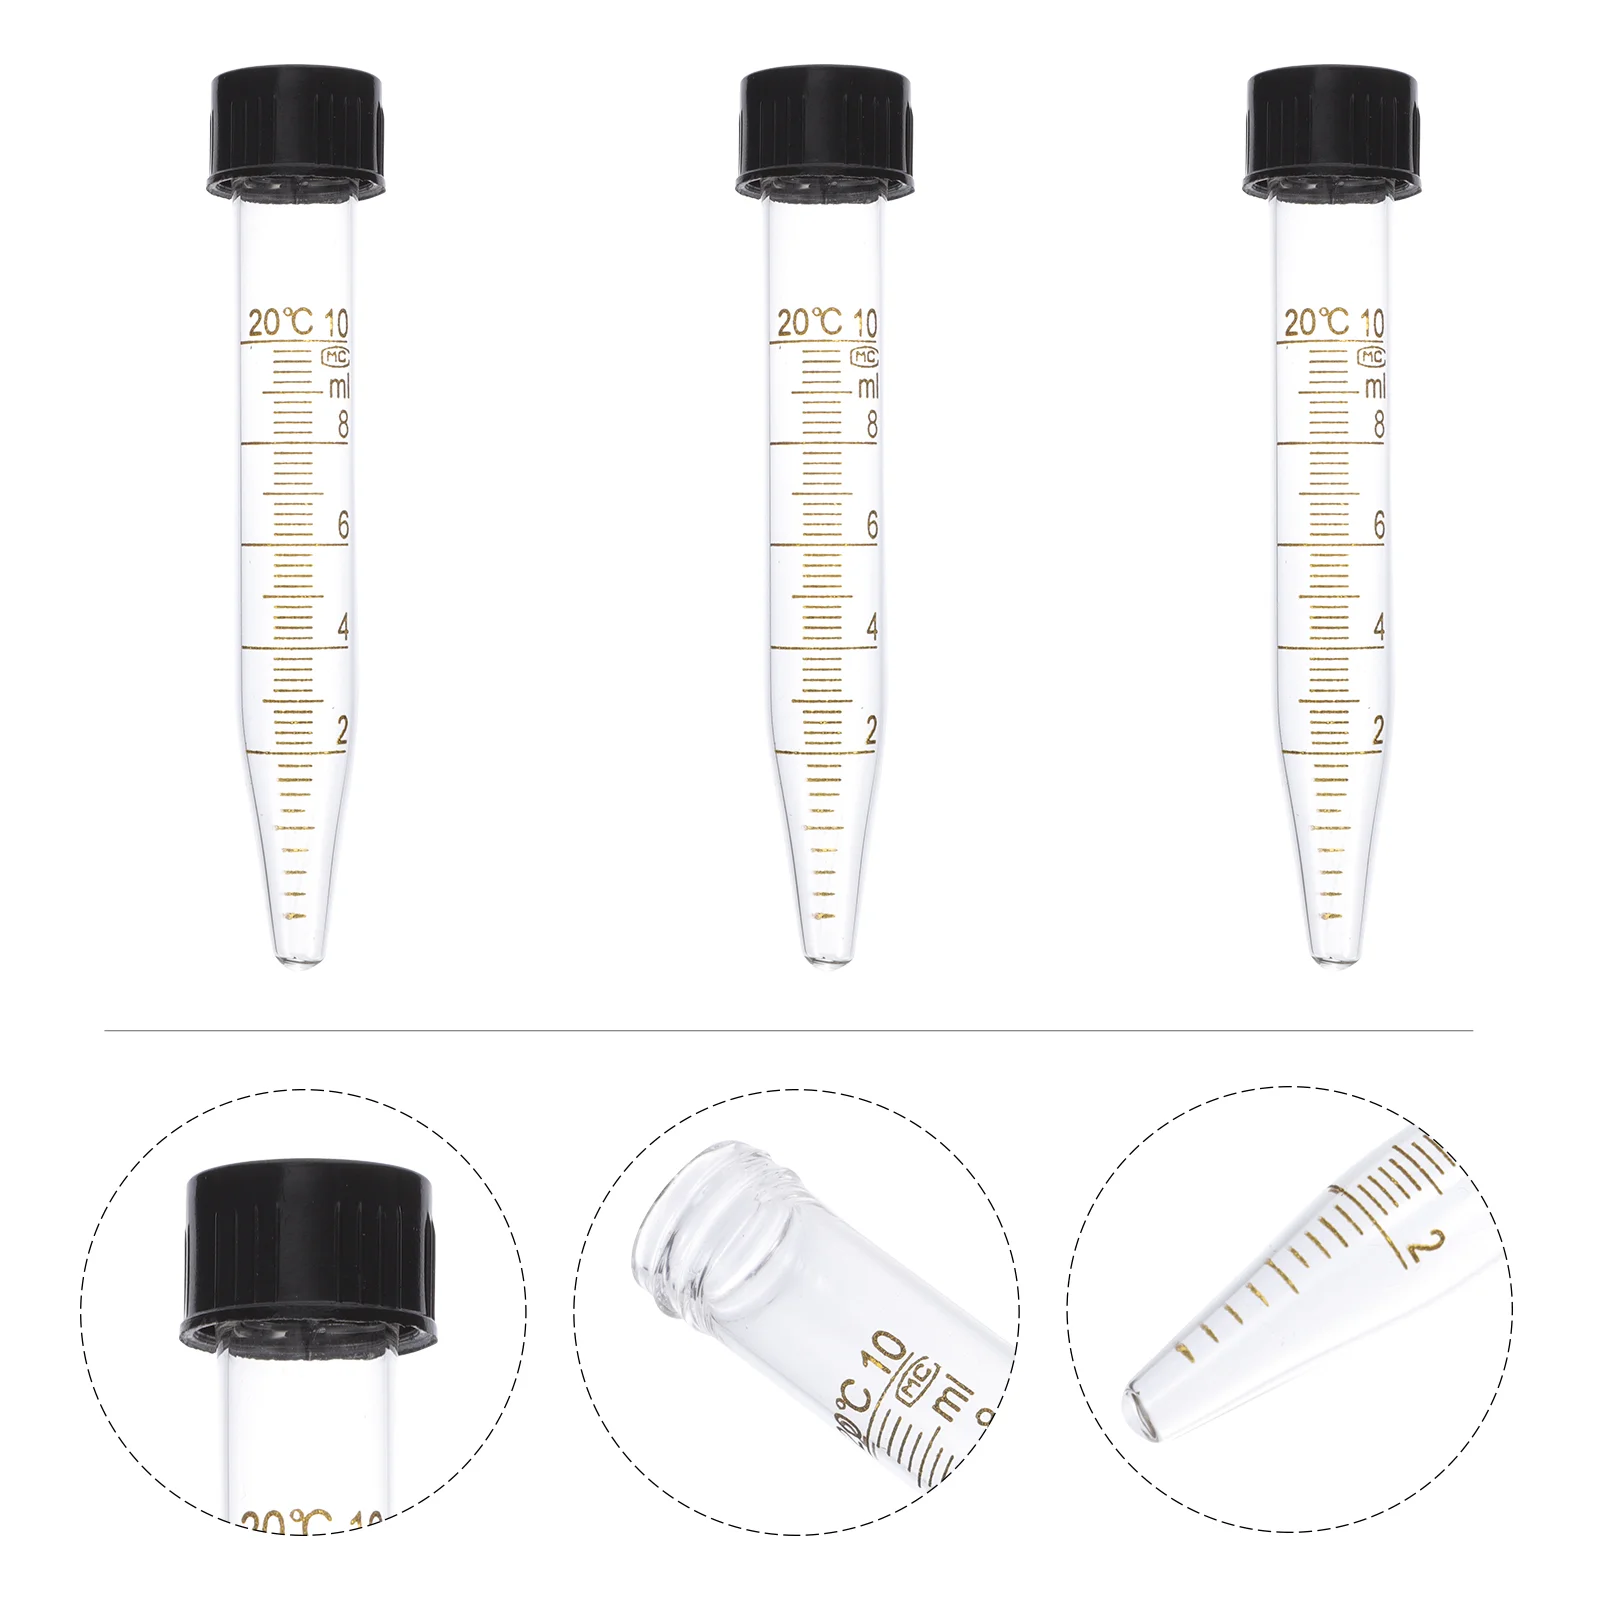 

3 Pcs Screw Graduated Test Tube Glass Tubes 10ml Centrifuge Spiral Hat Experiment Tools Plastic Liquid Container Pipes